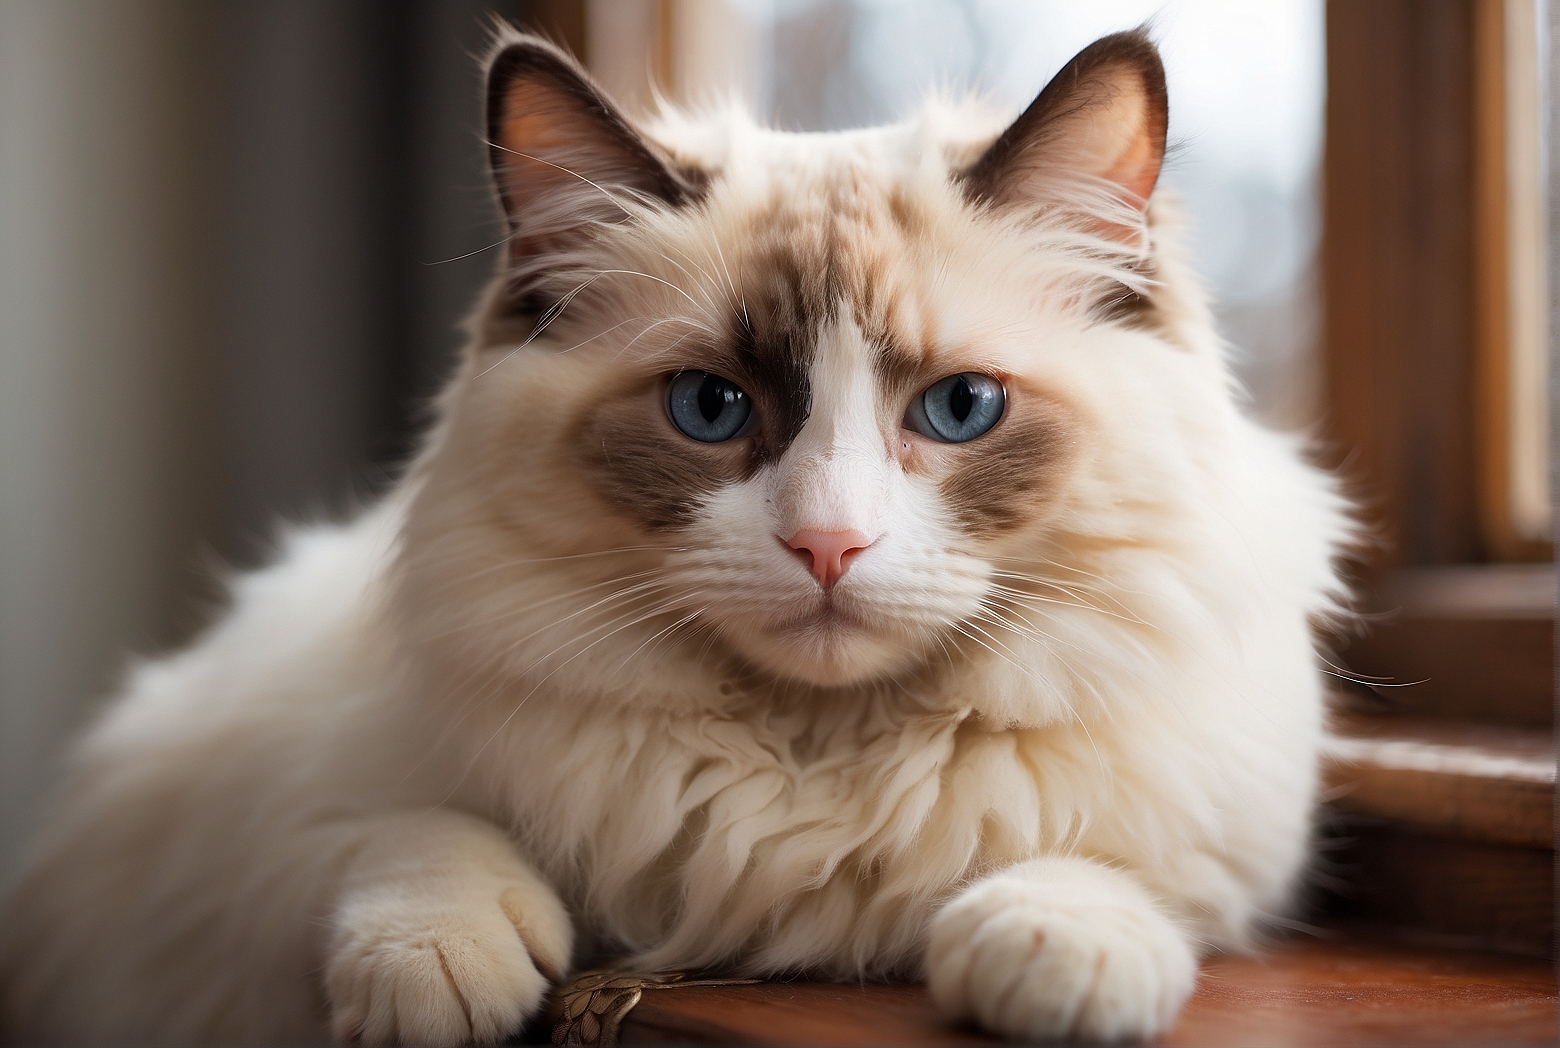 The Importance of Companionship for Ragdoll Cats